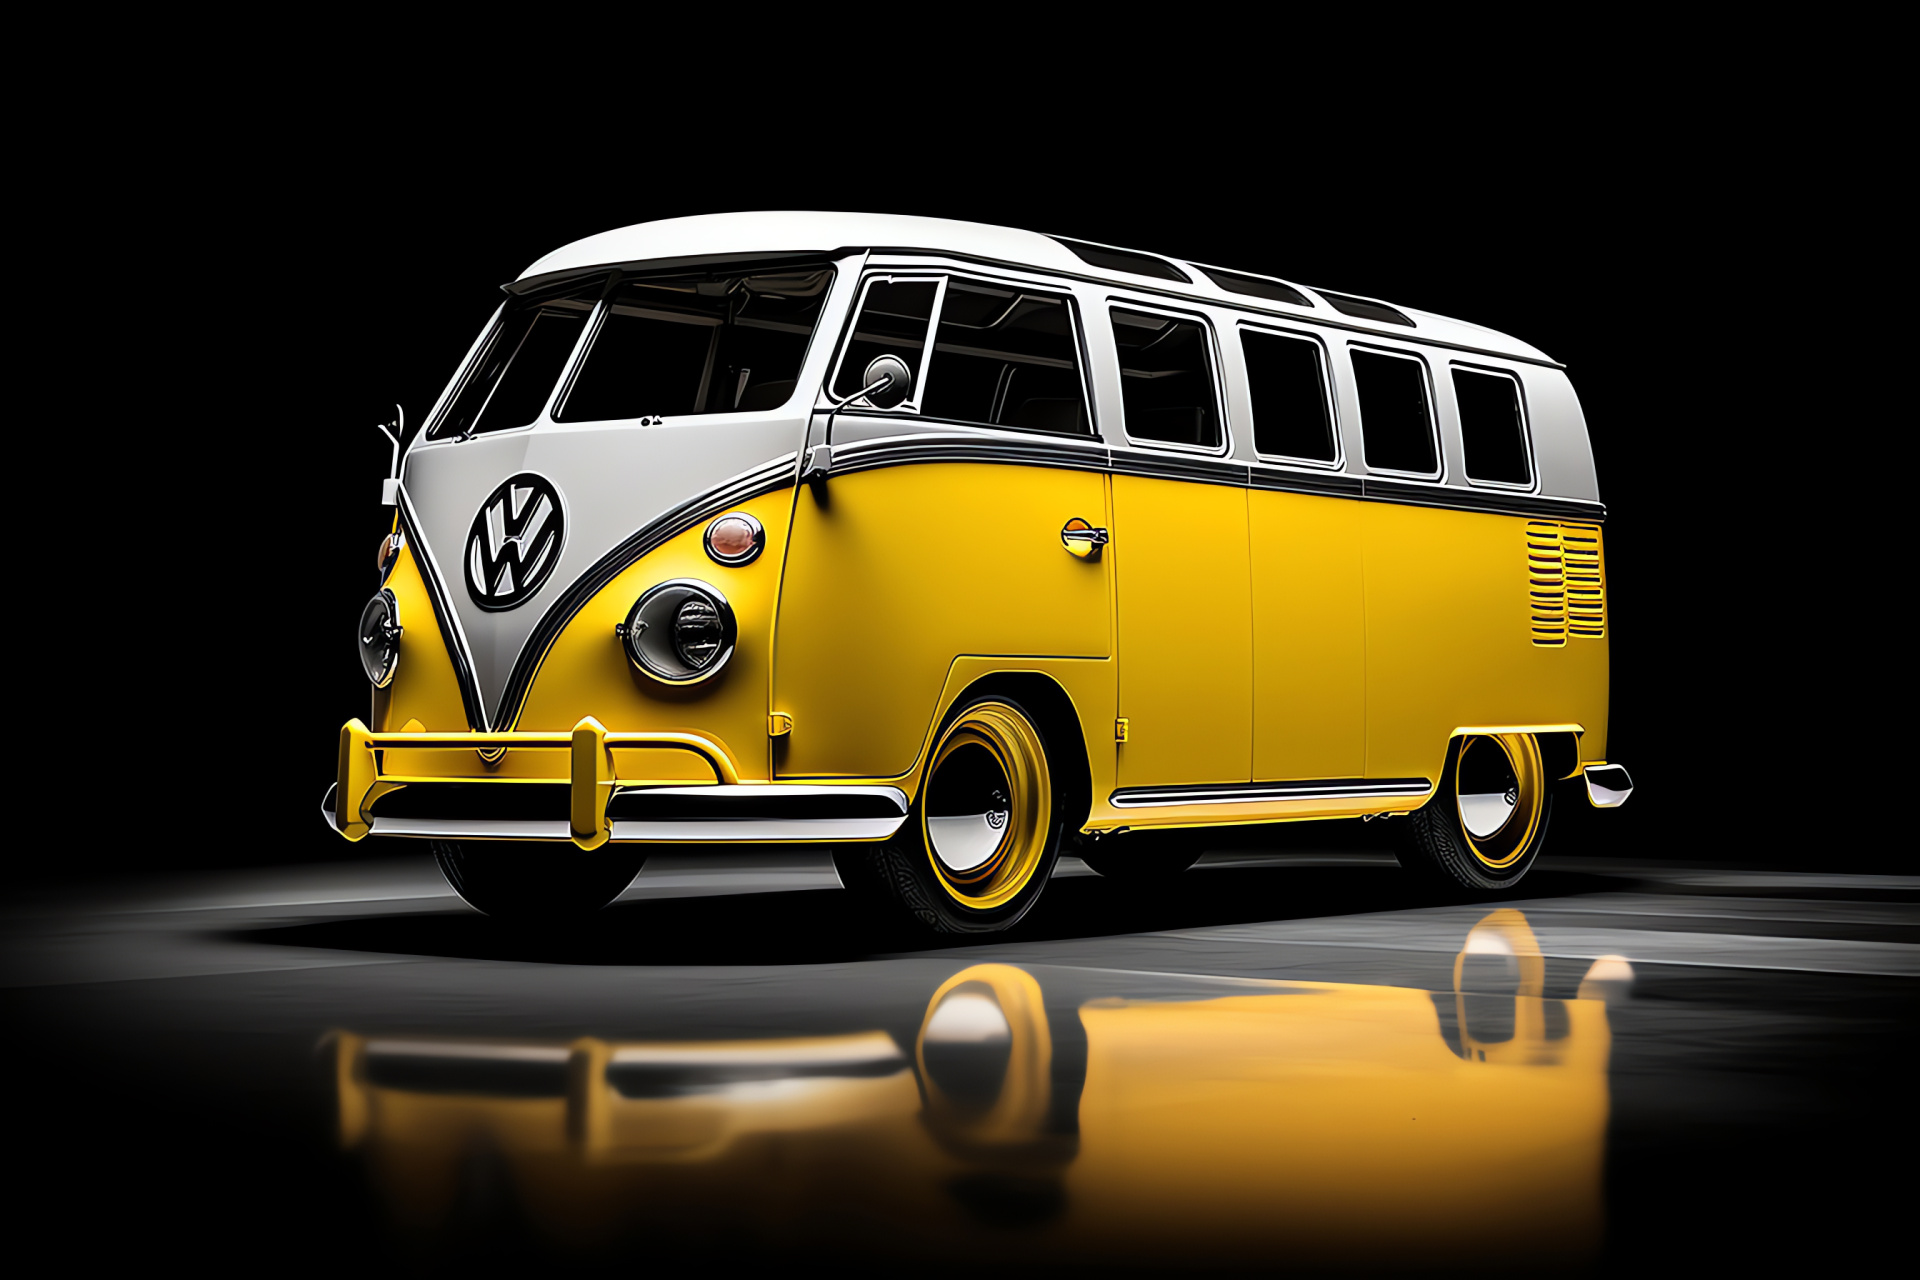 VW Bus T1 Panel Van, classic yellow, vintage collection, time-honored design, collector's item, HD Desktop Wallpaper